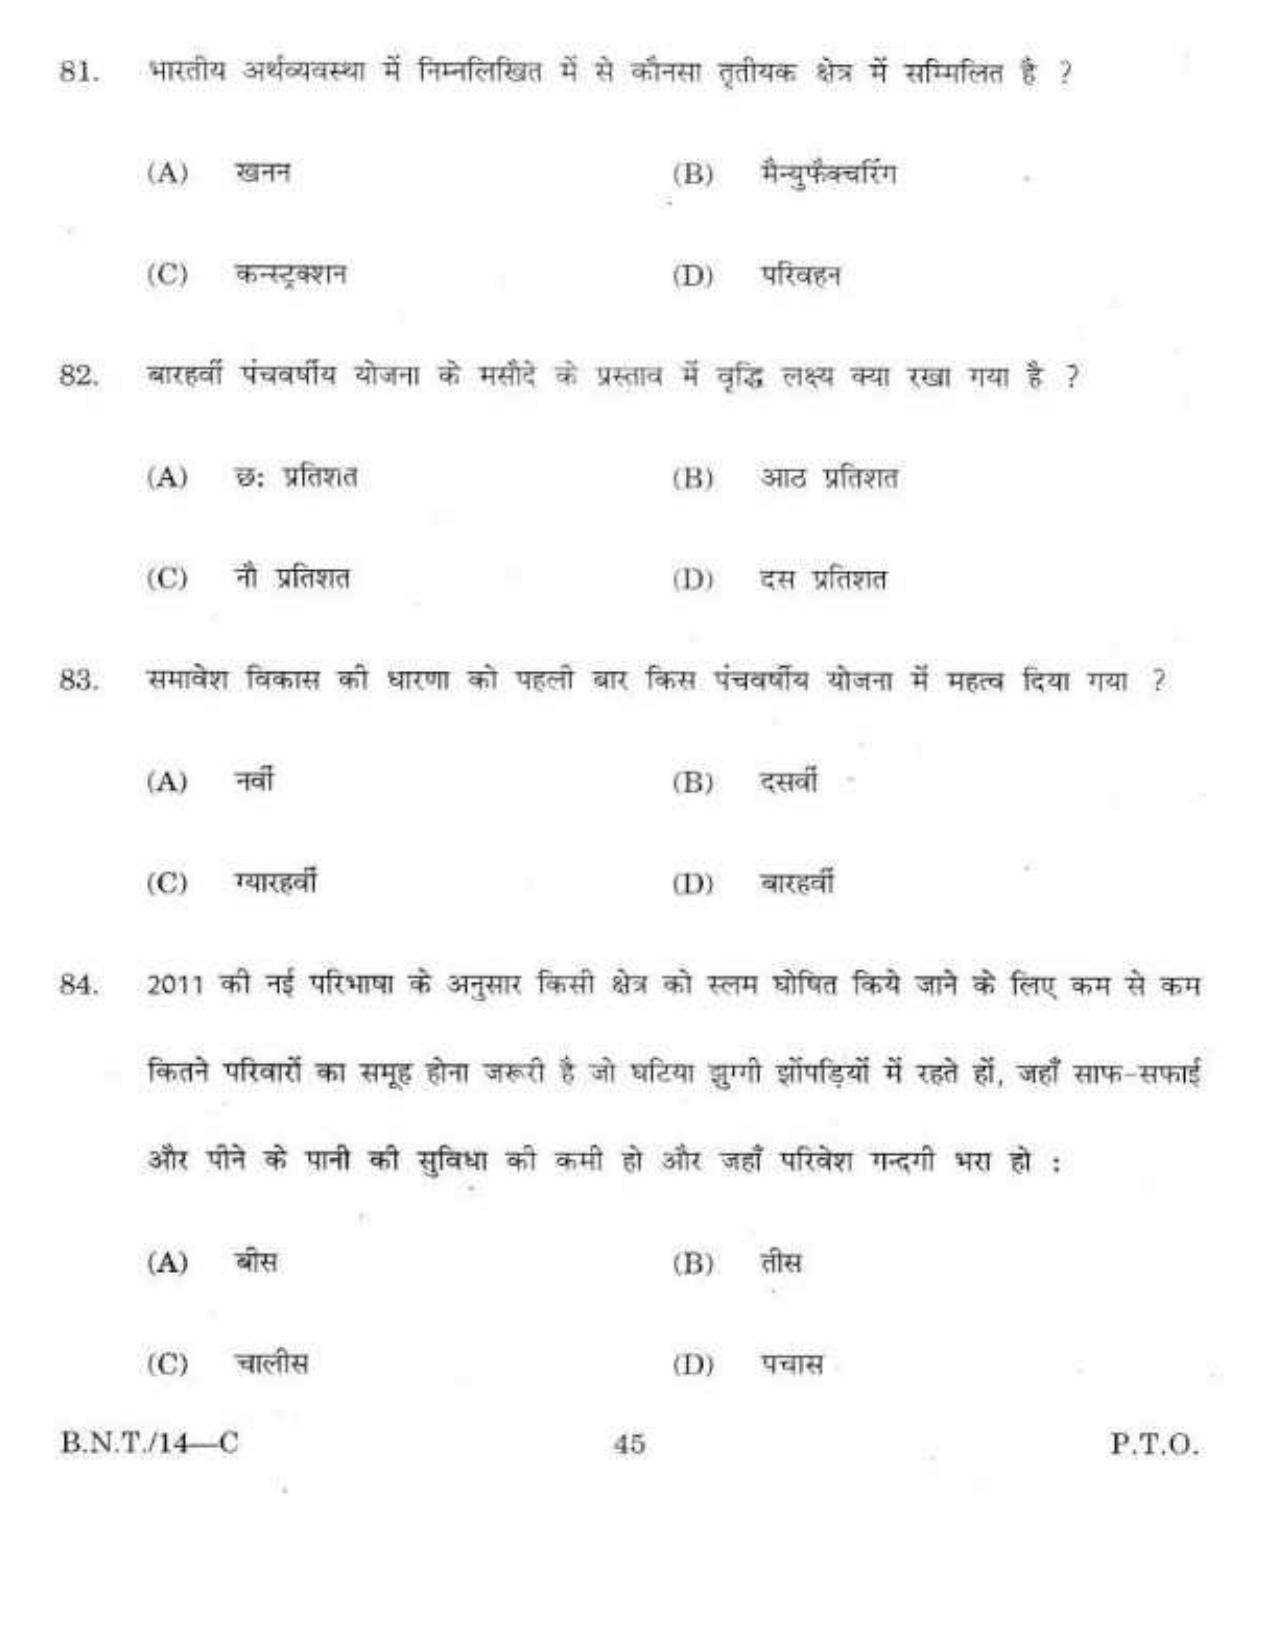 BSMFC Recovery Agent Old Question Papers for General Knowledge - Page 45